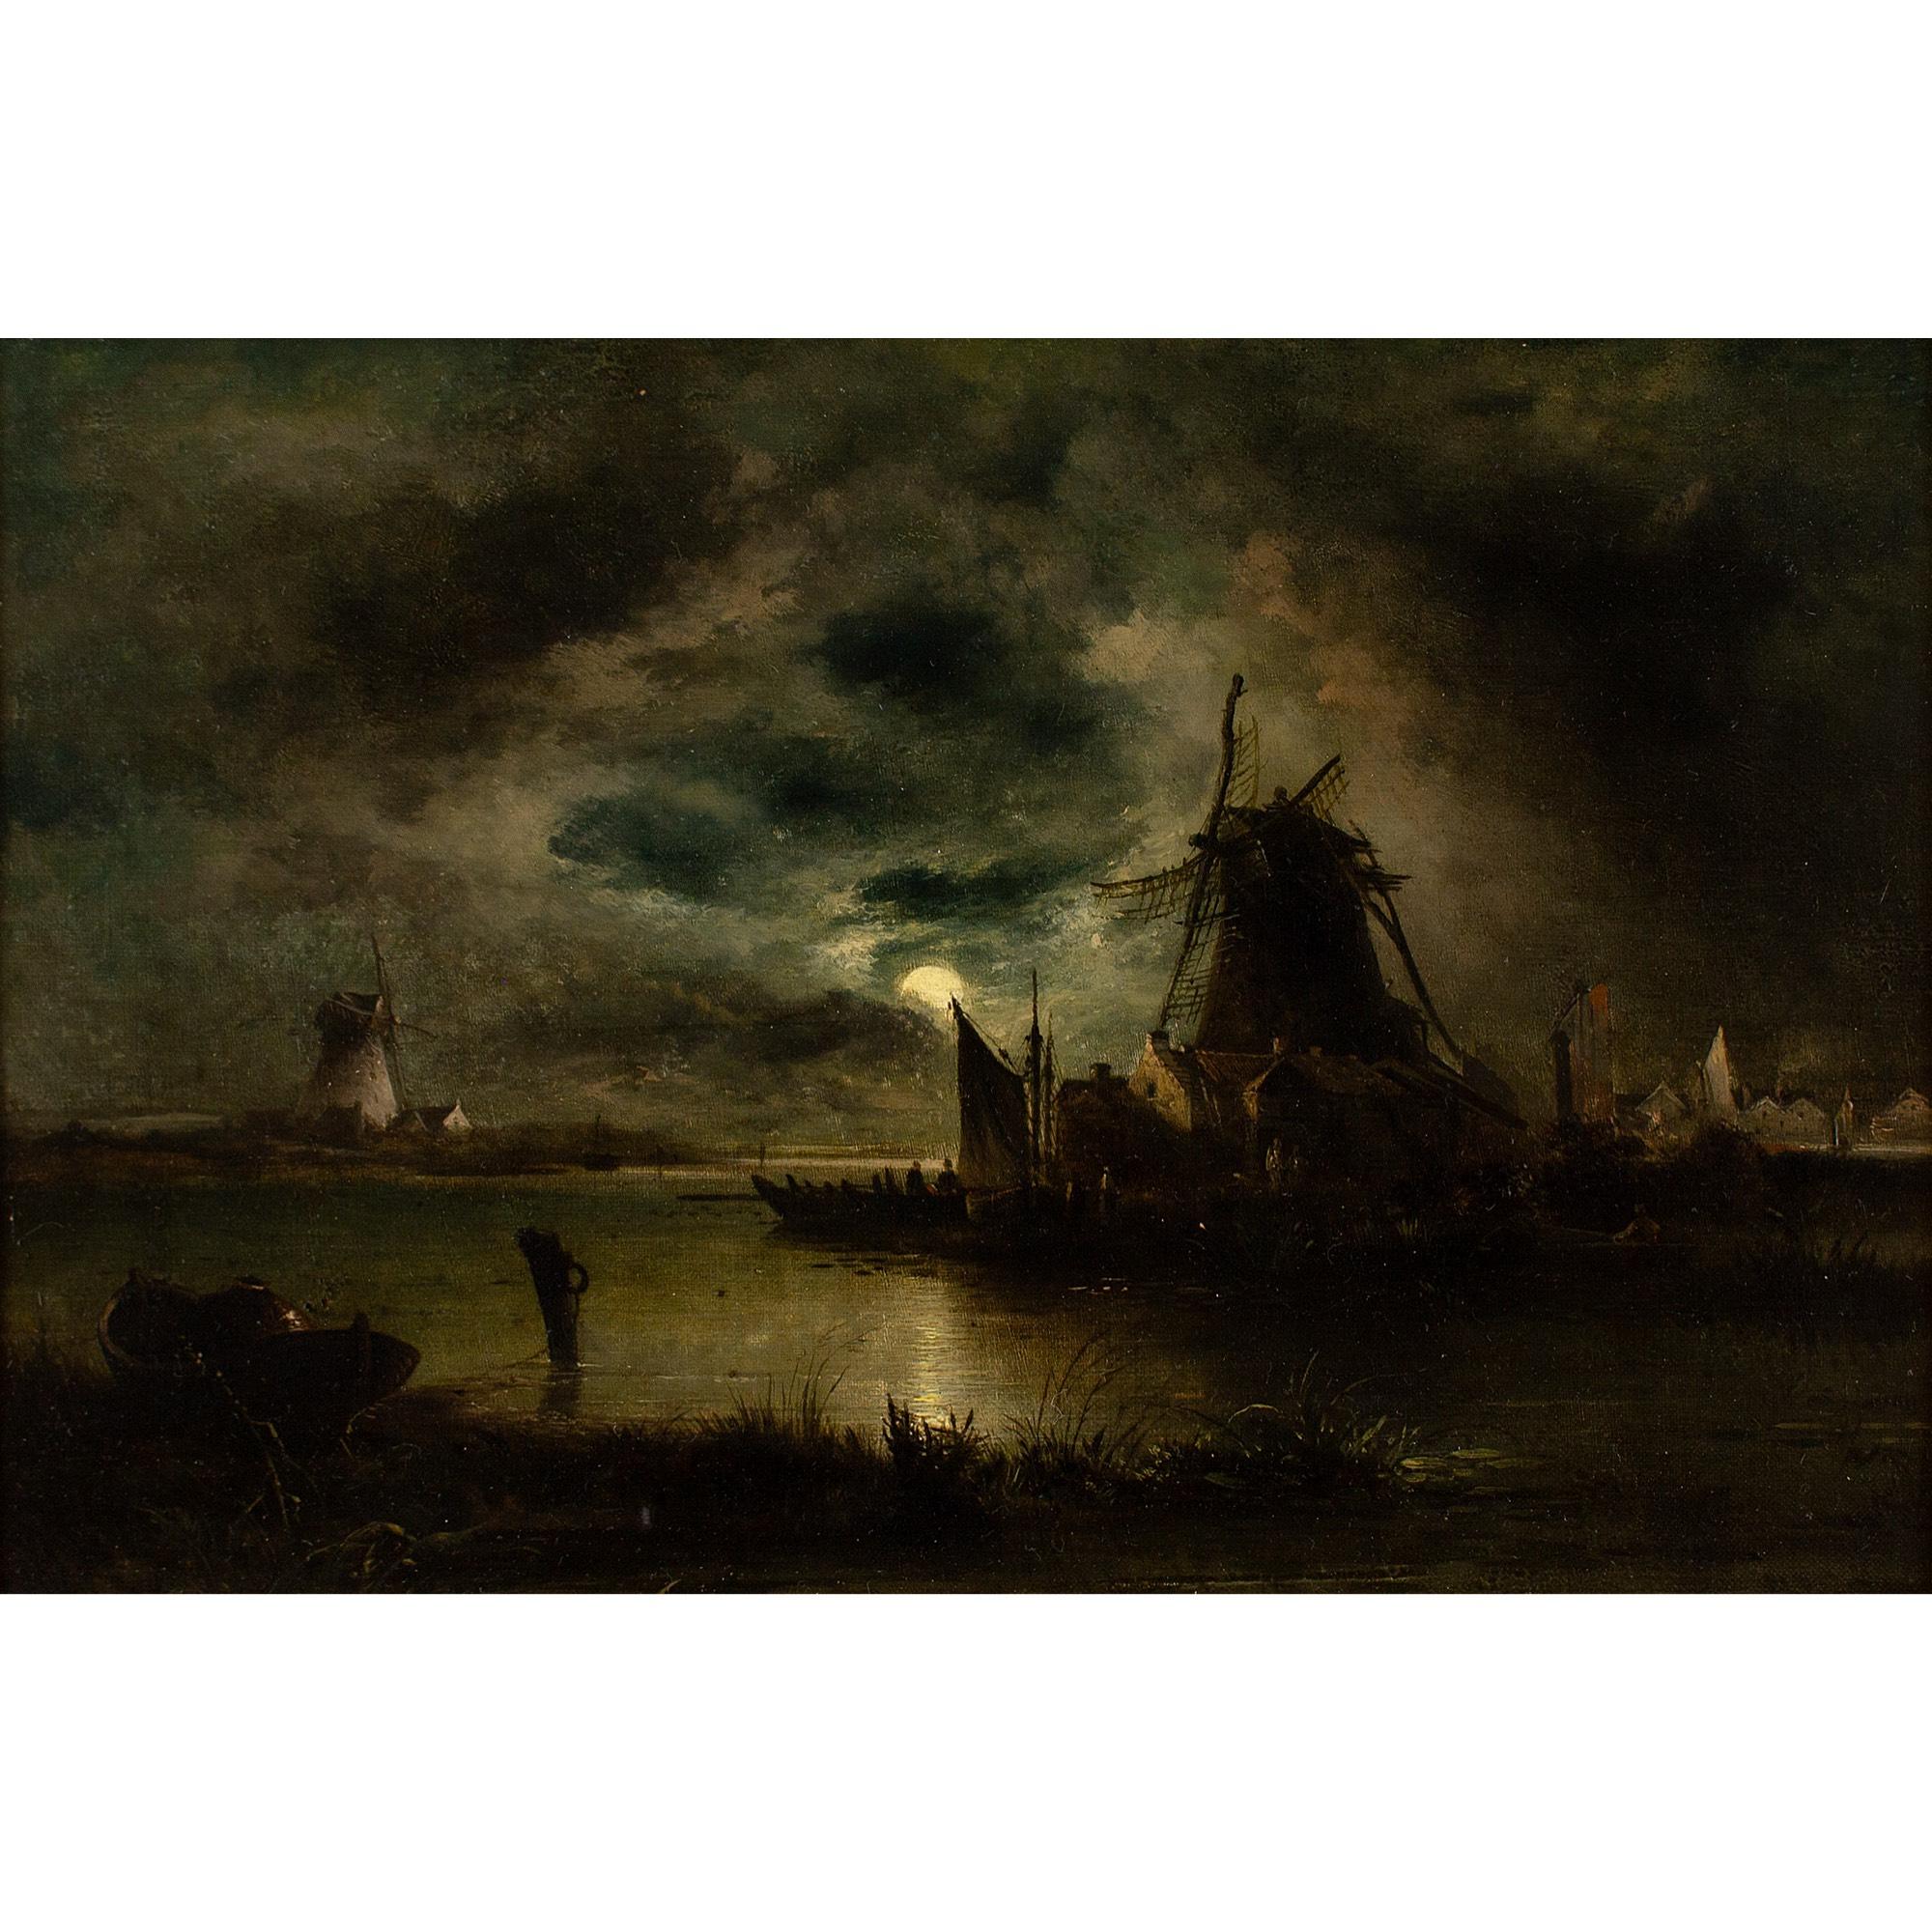 This mid-19th-century oil painting by British artist William Henry Crome (1806-1873) depicts a winding river view by moonlight.

A tired windmill, its blades battered by the elements, stands like an homage to the old Dutch Masters. Above, a gentle